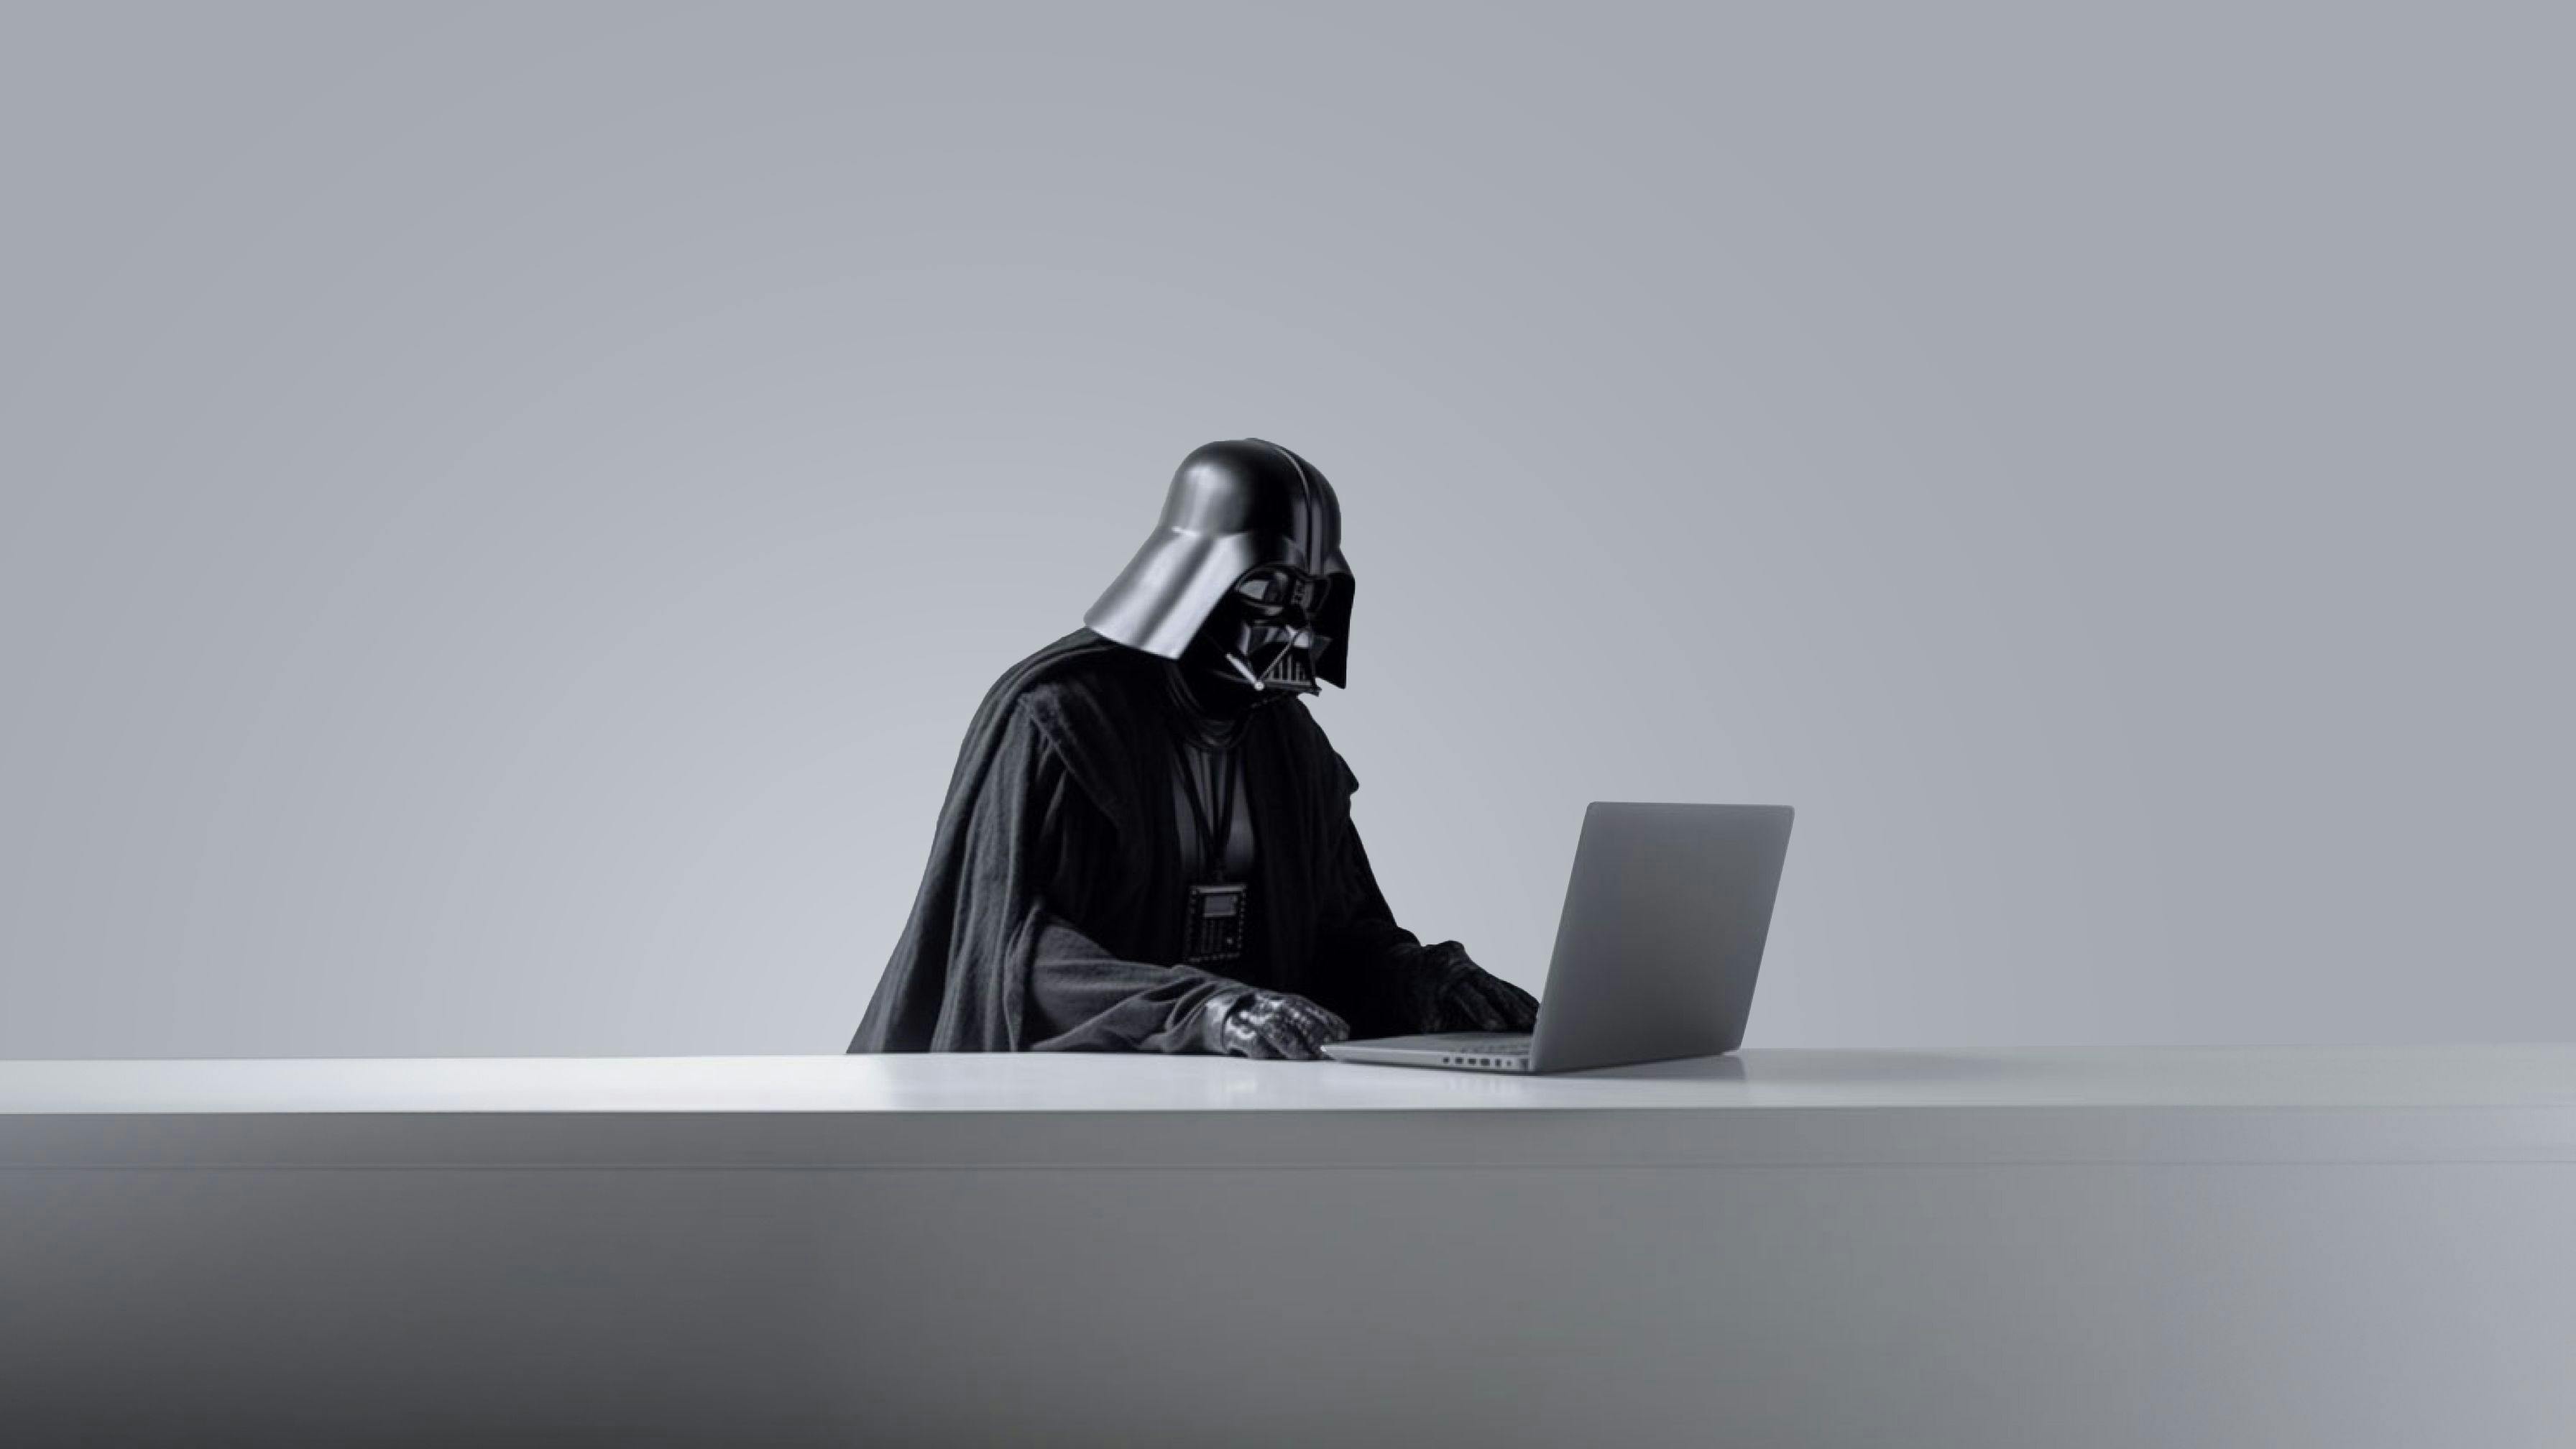 darth vader sitting in front of a macbook